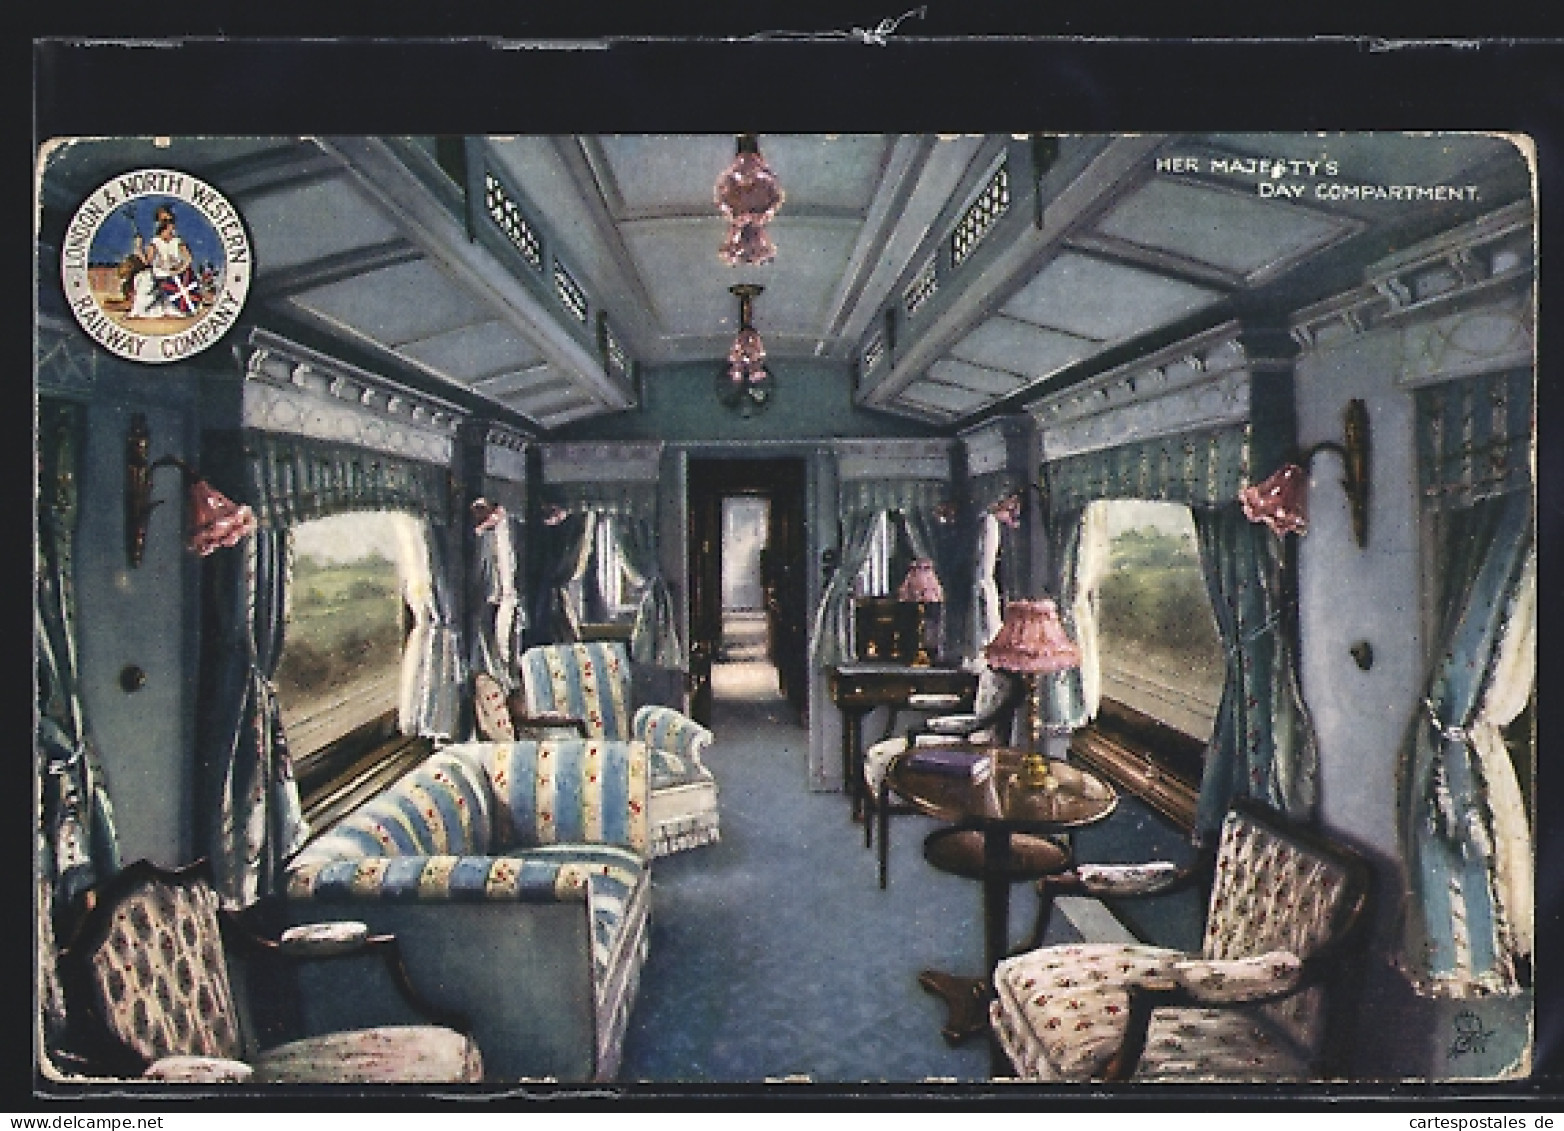 Pc London & North Western Railway Company, Her Majesty`s Day Compartment, Englische Eisenbahn  - Trenes